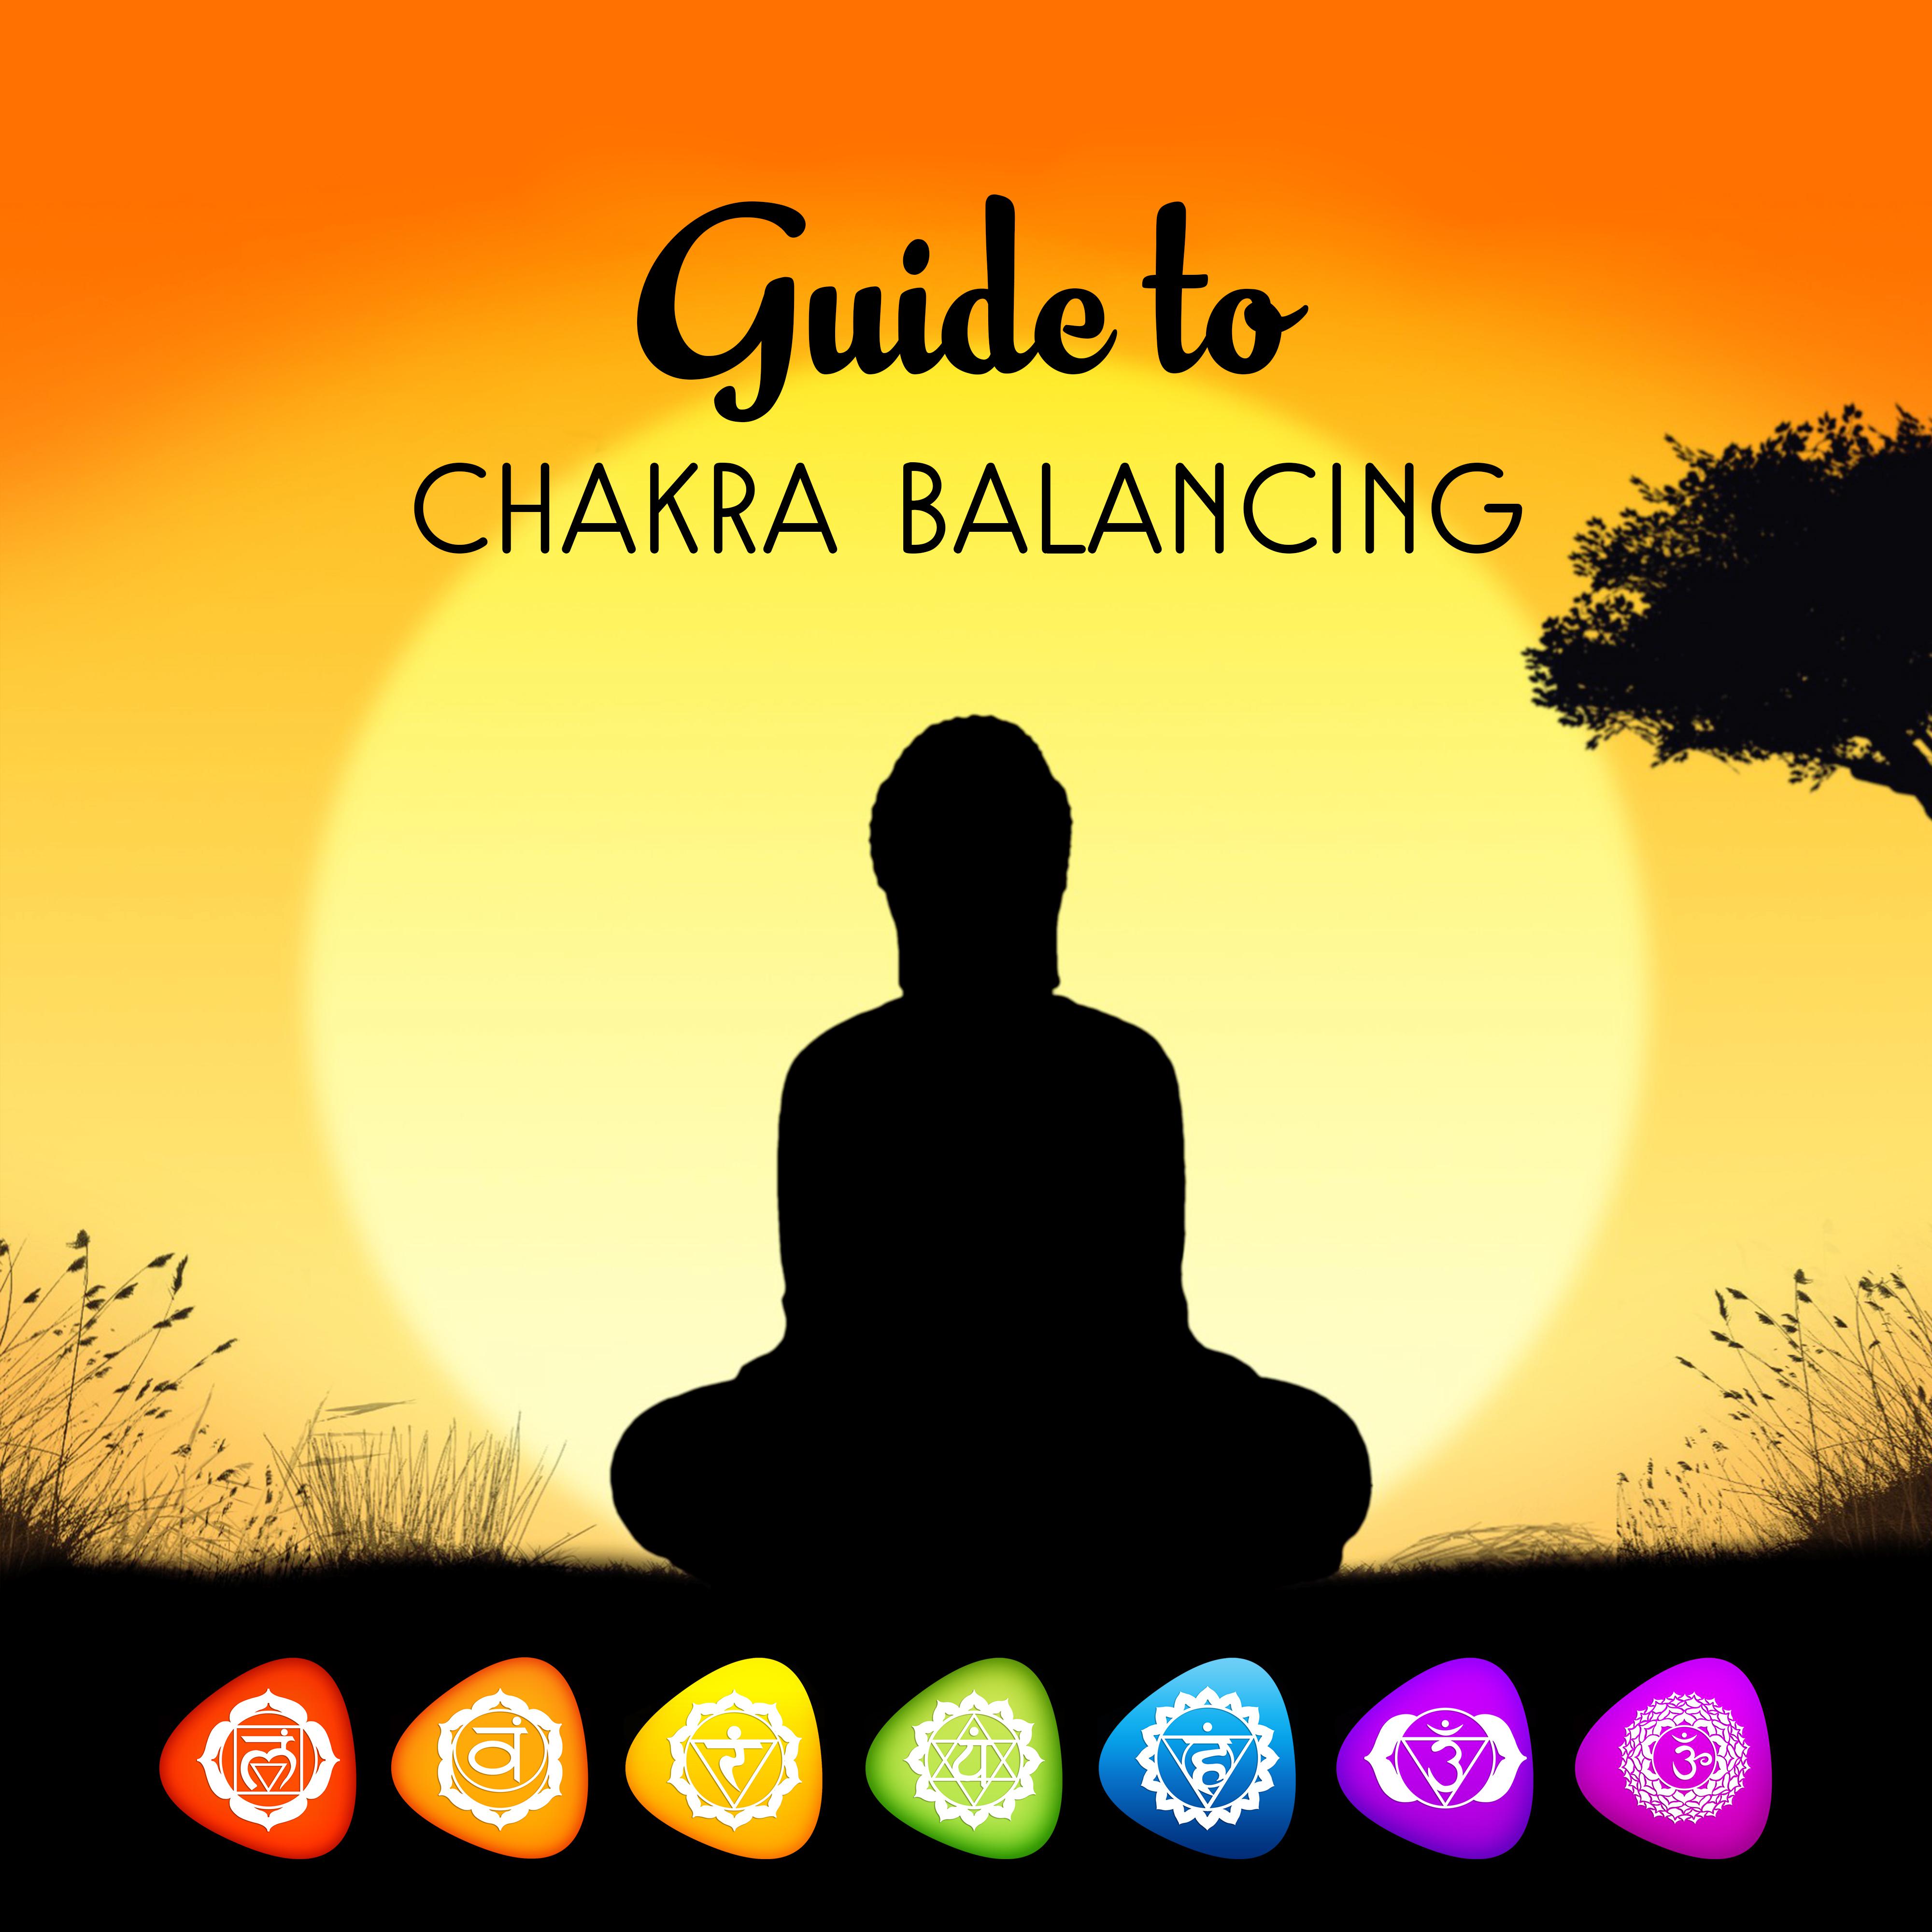 Guide to Chakra Balancing – Soft Meditation Sounds, Music for Relaxation, Spirit Lounge, No More Stress